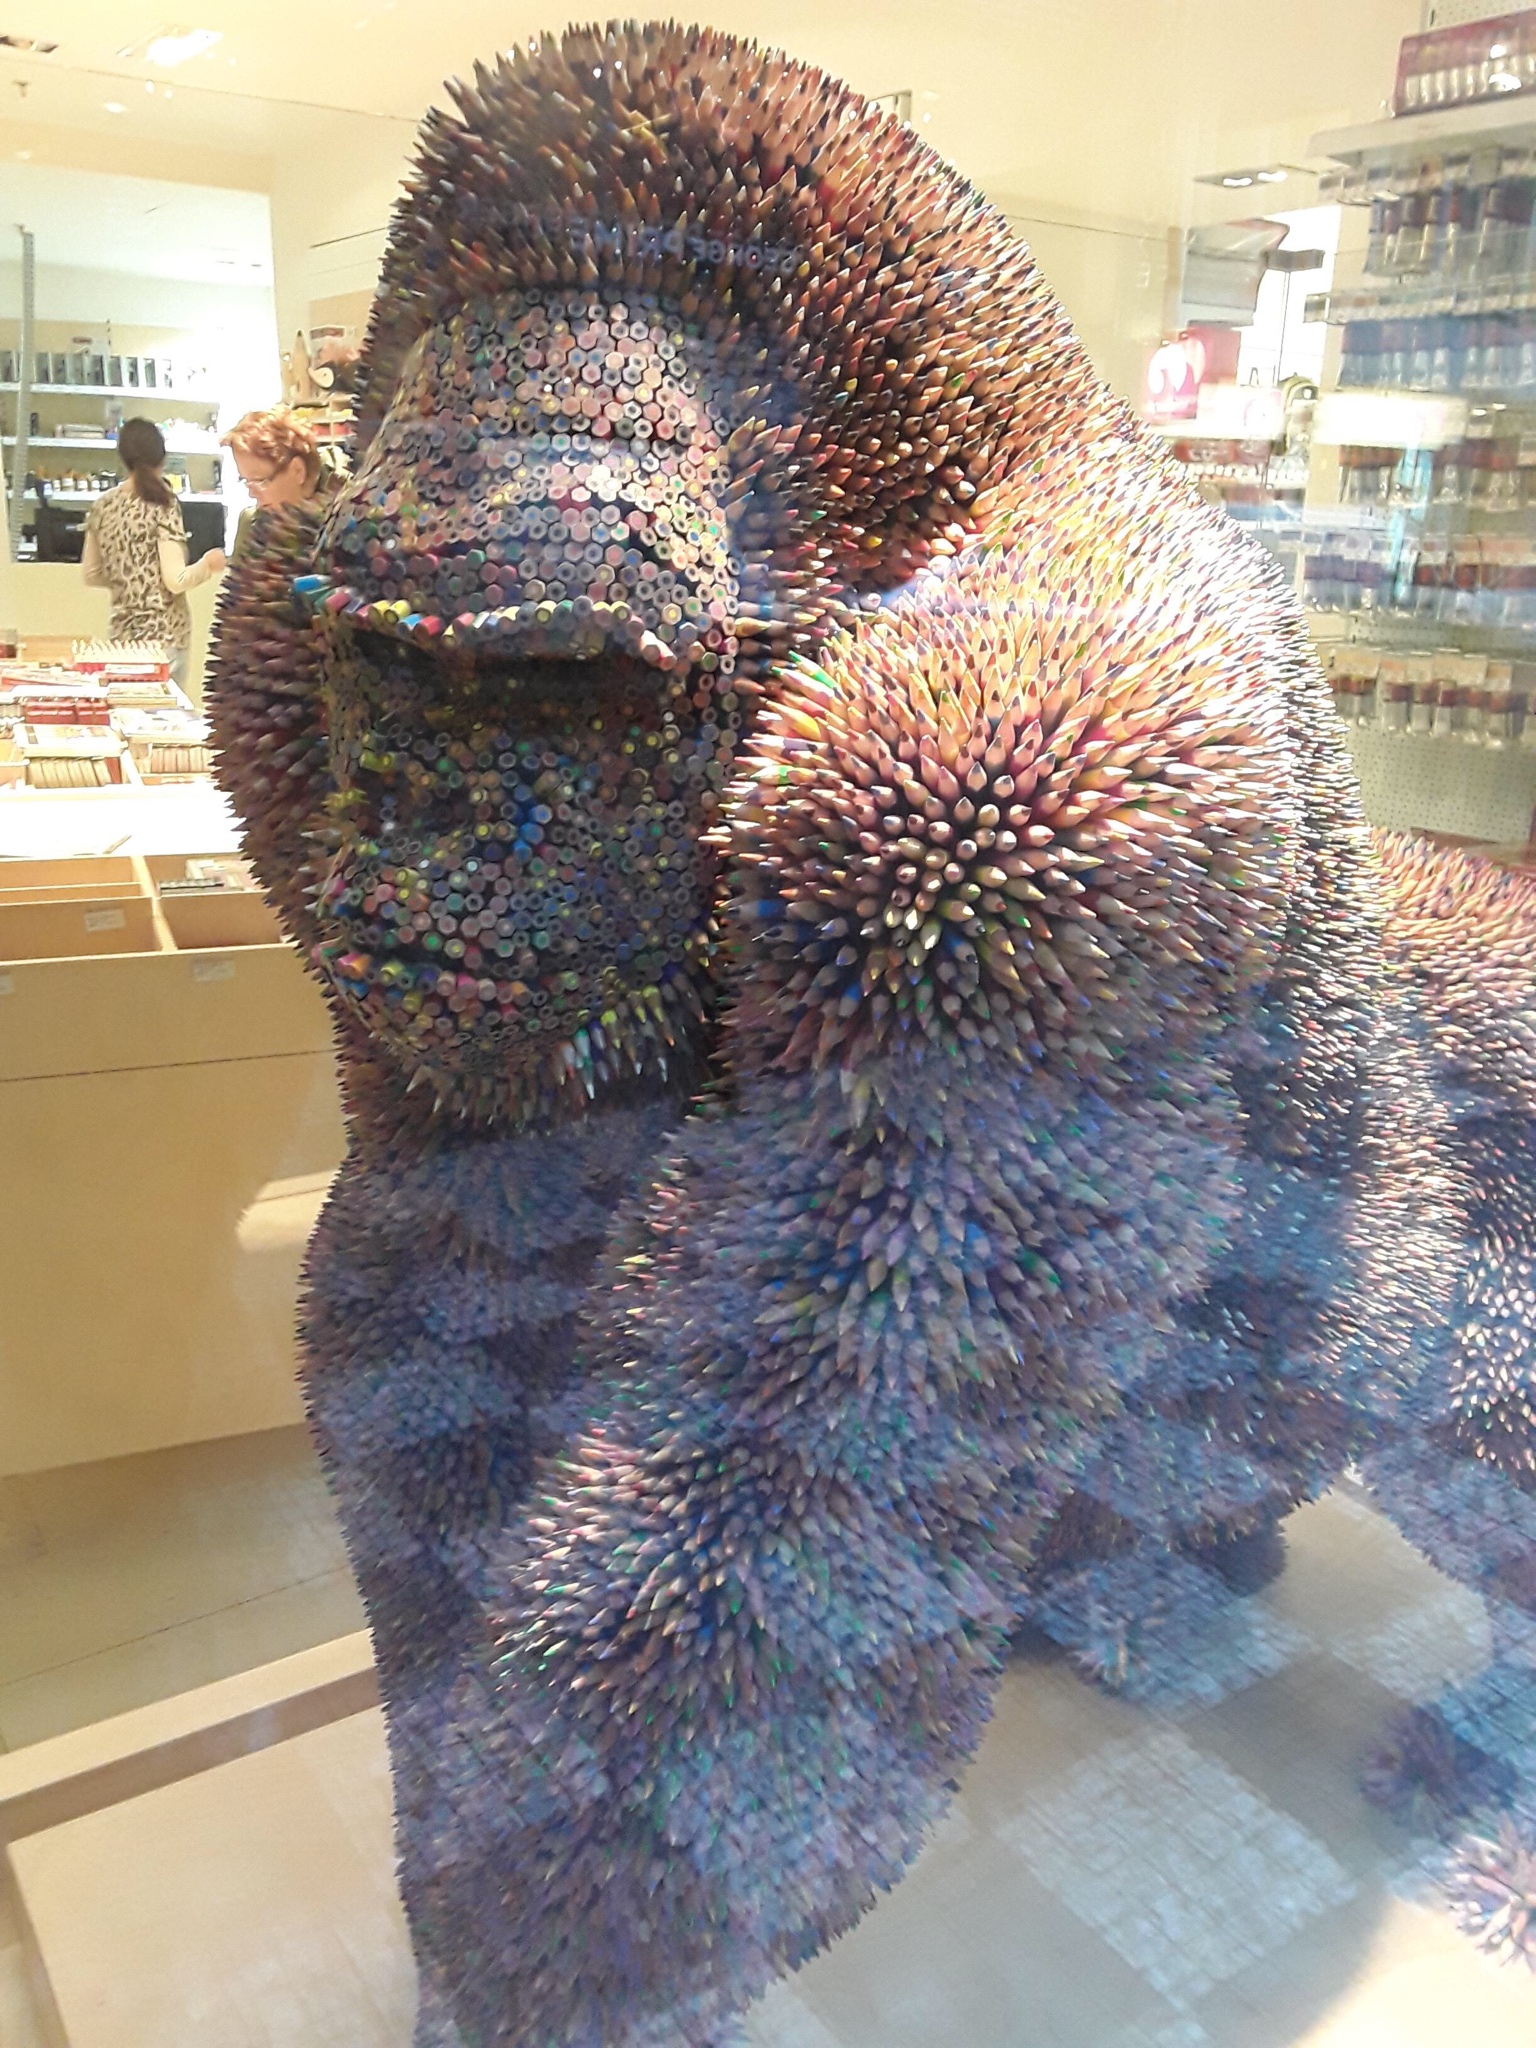 gorilla made out of colored pencils